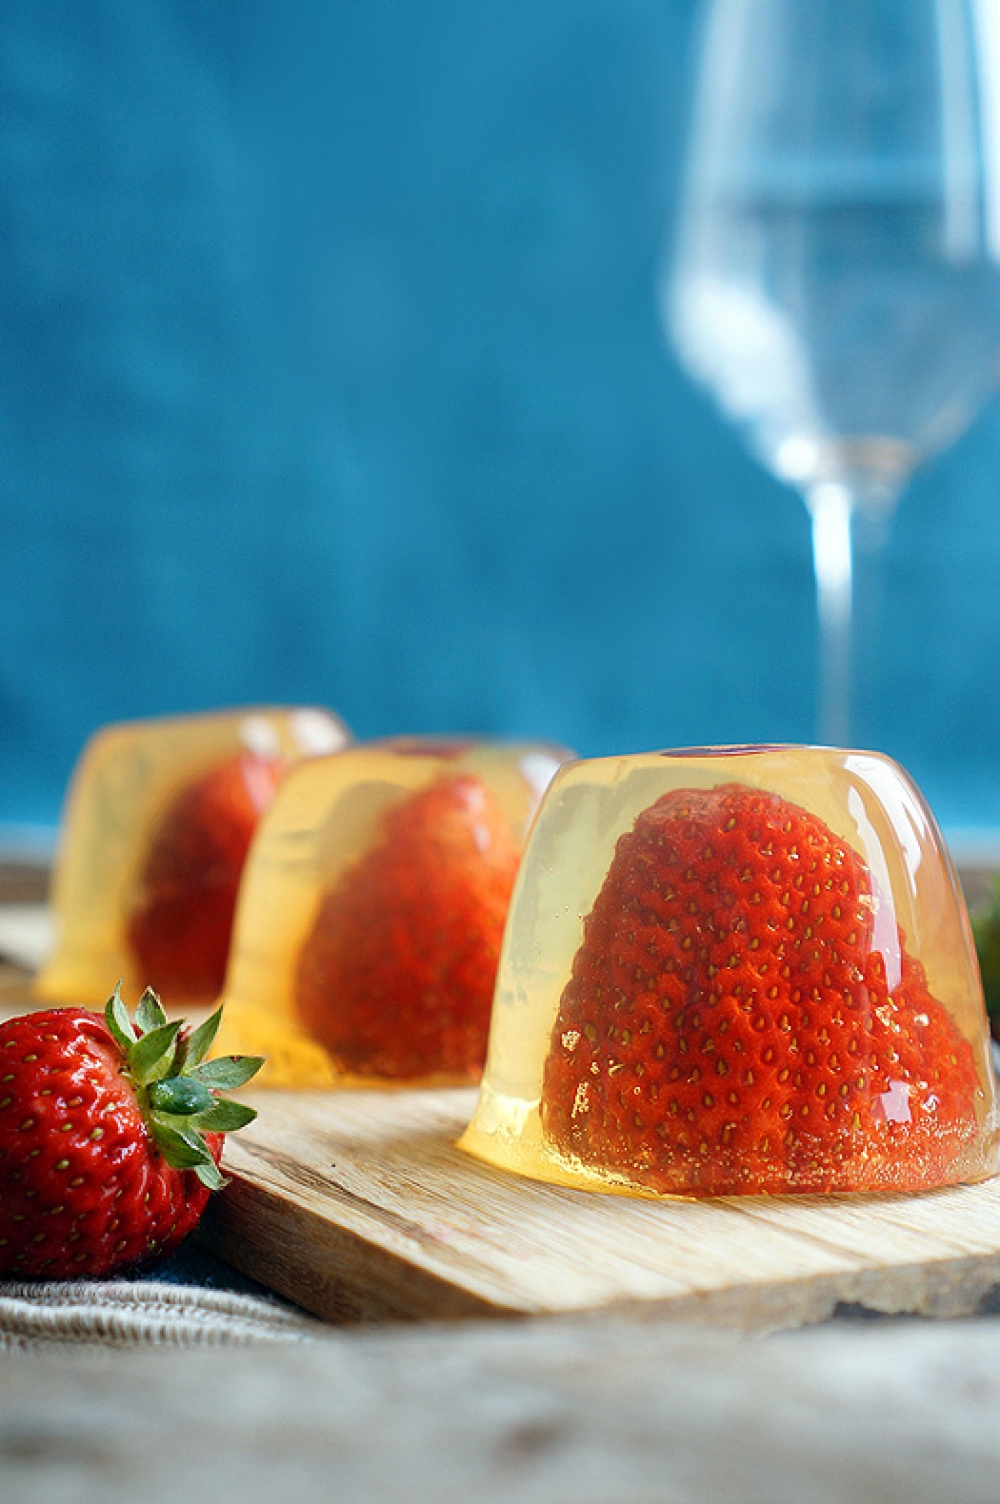 Jelly on champagne with fresh berries